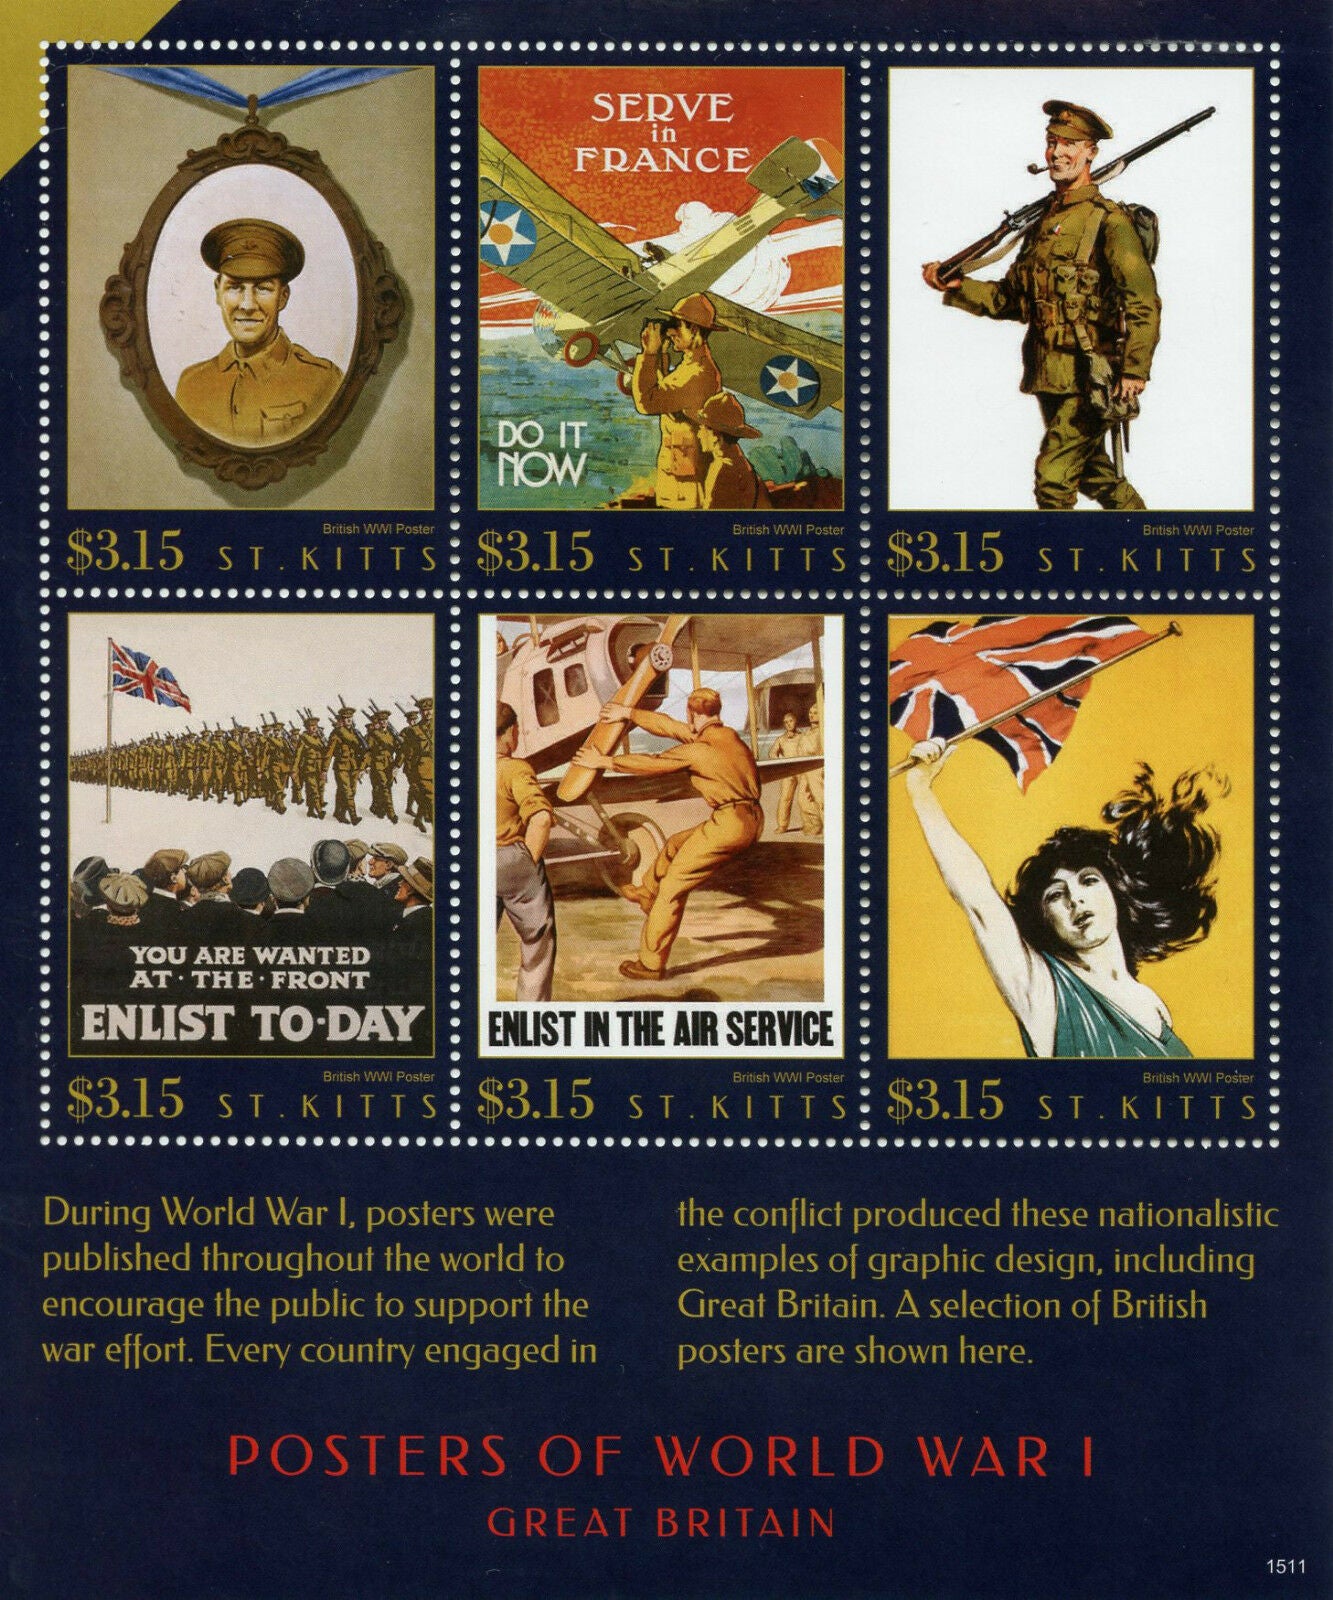 St Kitts Stamps 2015 MNH WWI WW1 Posters of World War I Great Britain 6v M/S